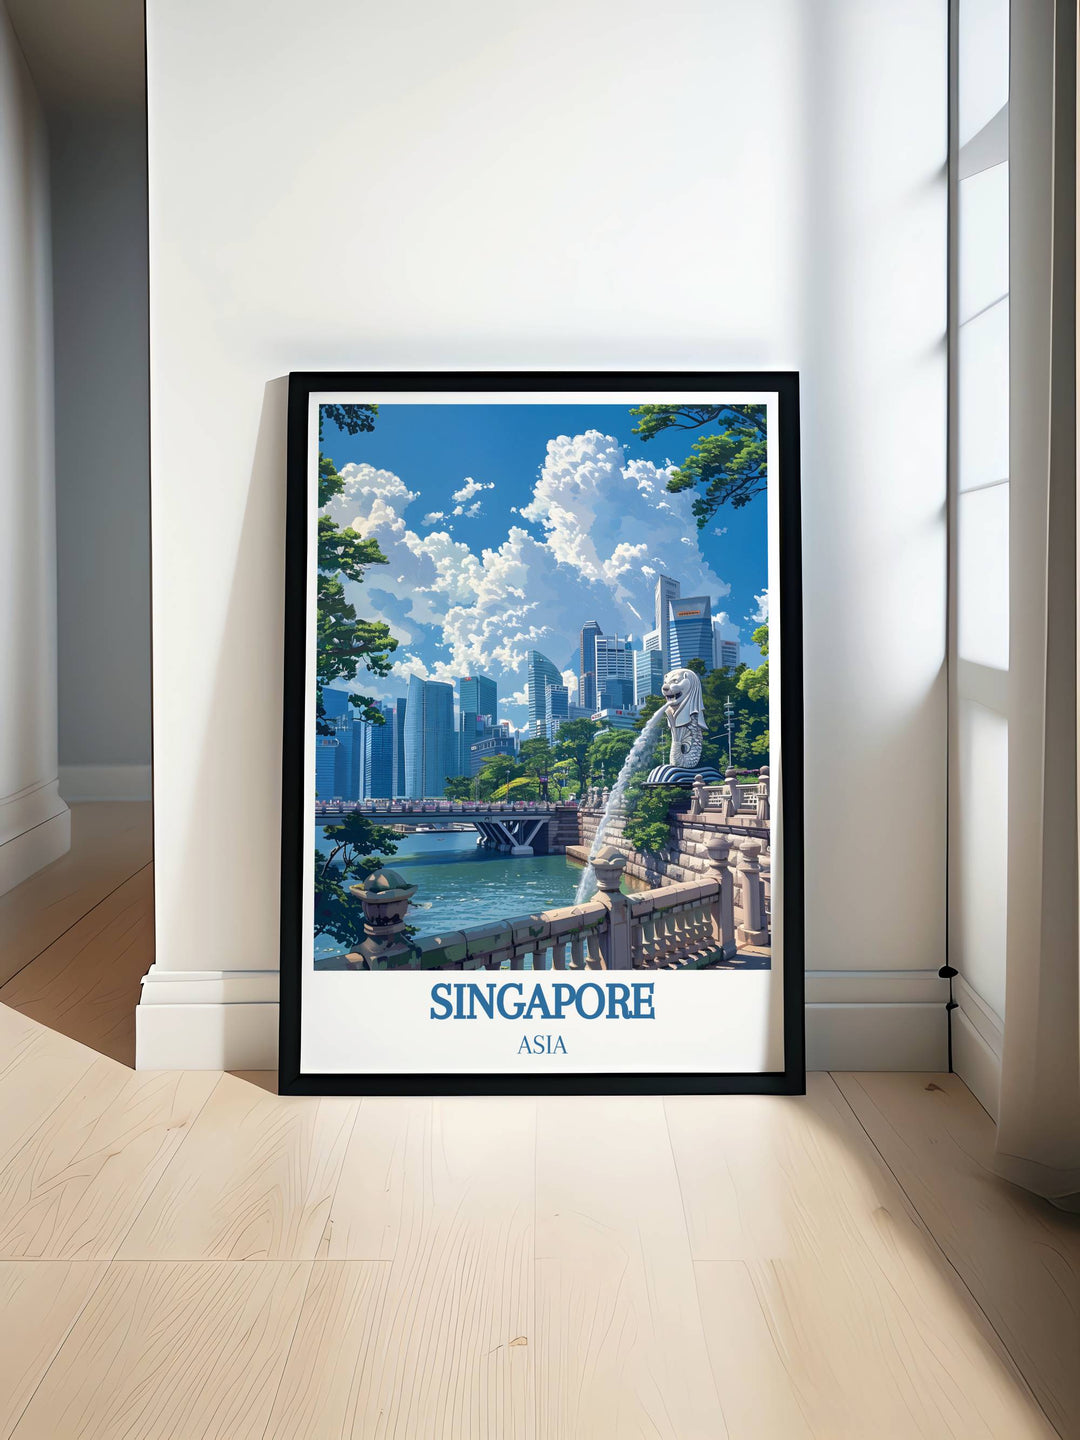 Merlion Park Gallery Wall Art capturing the vibrant spirit of Singapores iconic landmark, perfect for adding charm to your home decor with detailed prints.